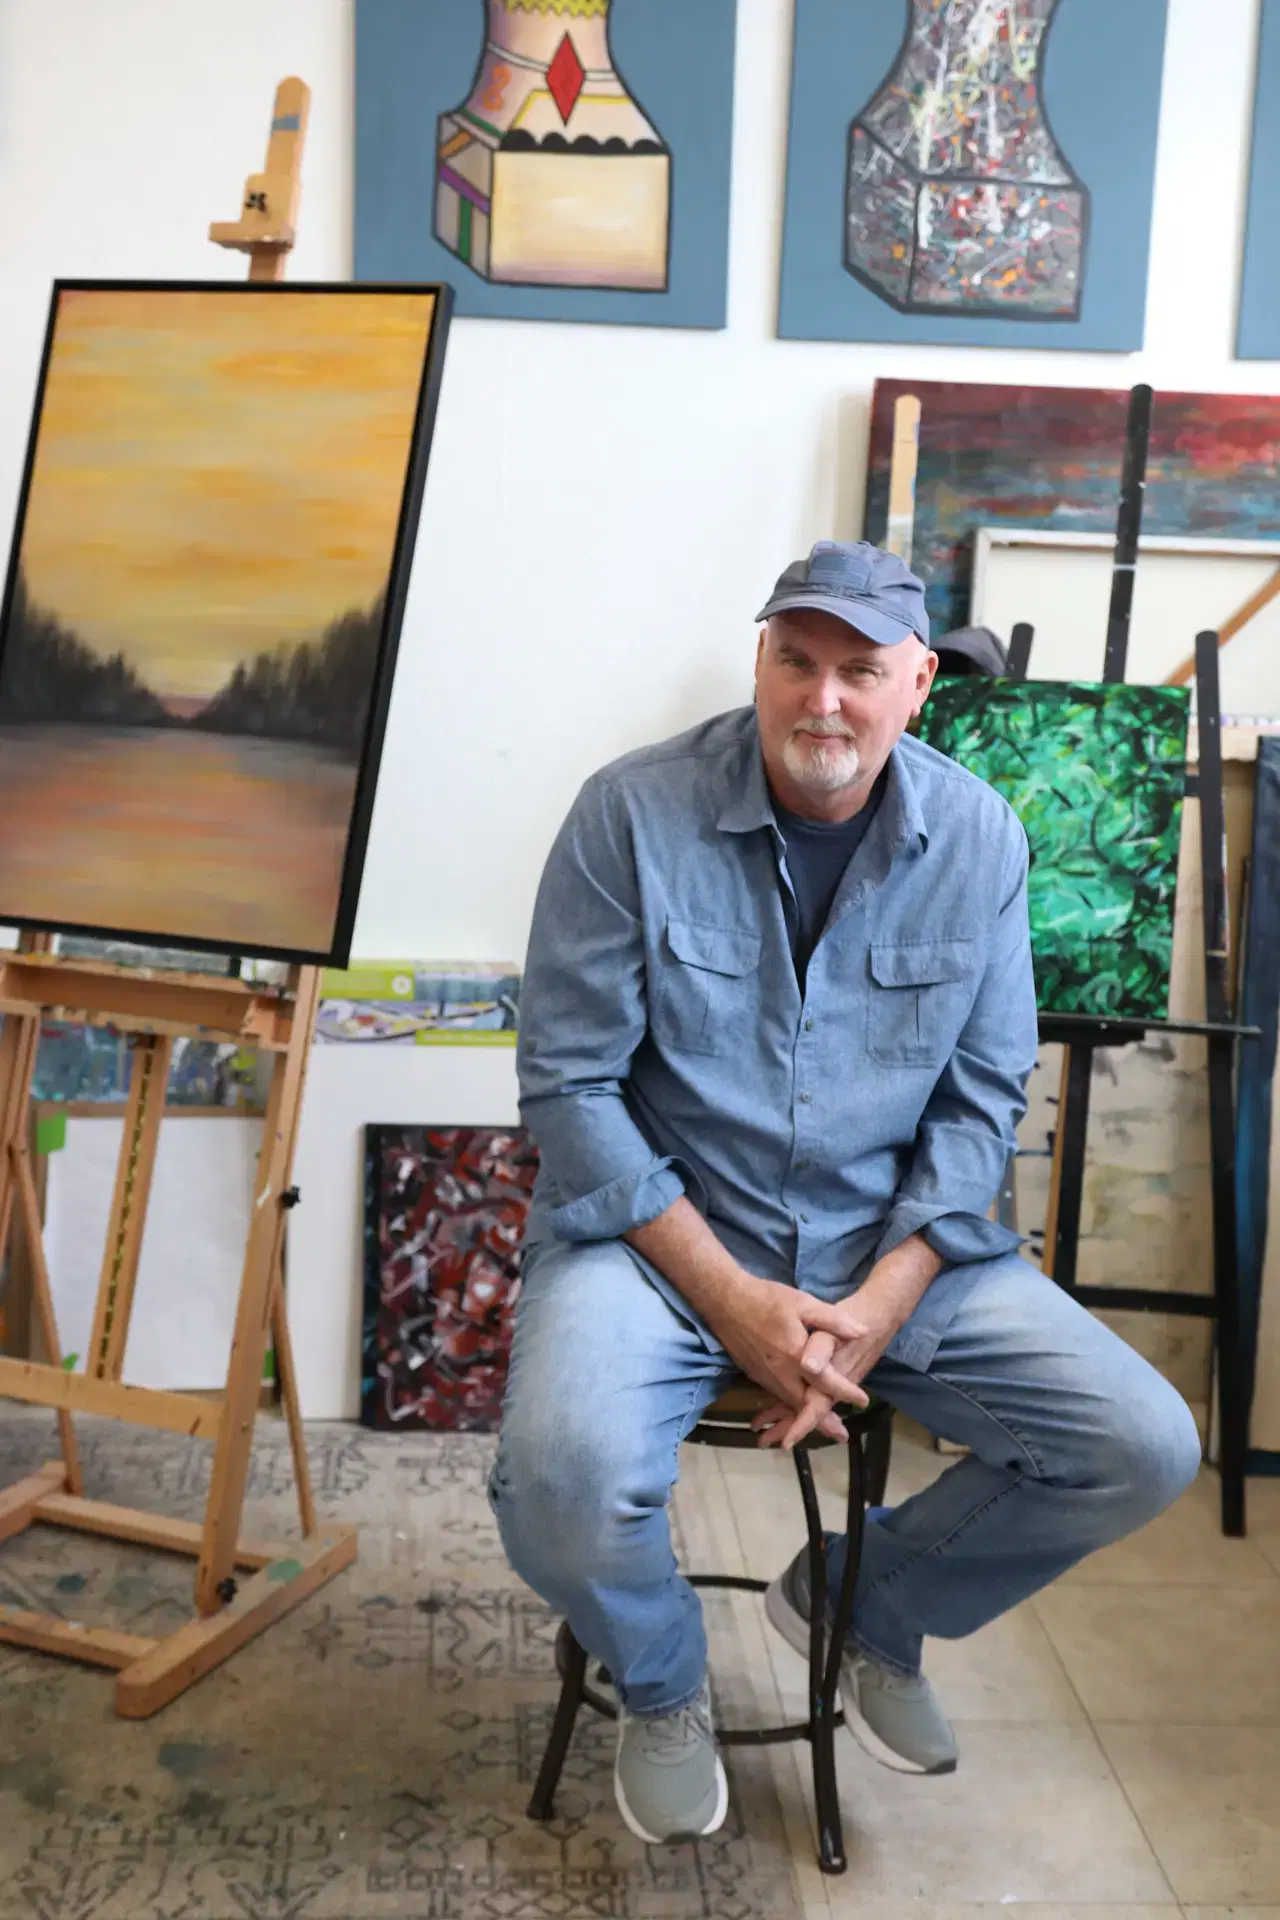 Dennis Hood artist sitting on a chair with canvases in the background.